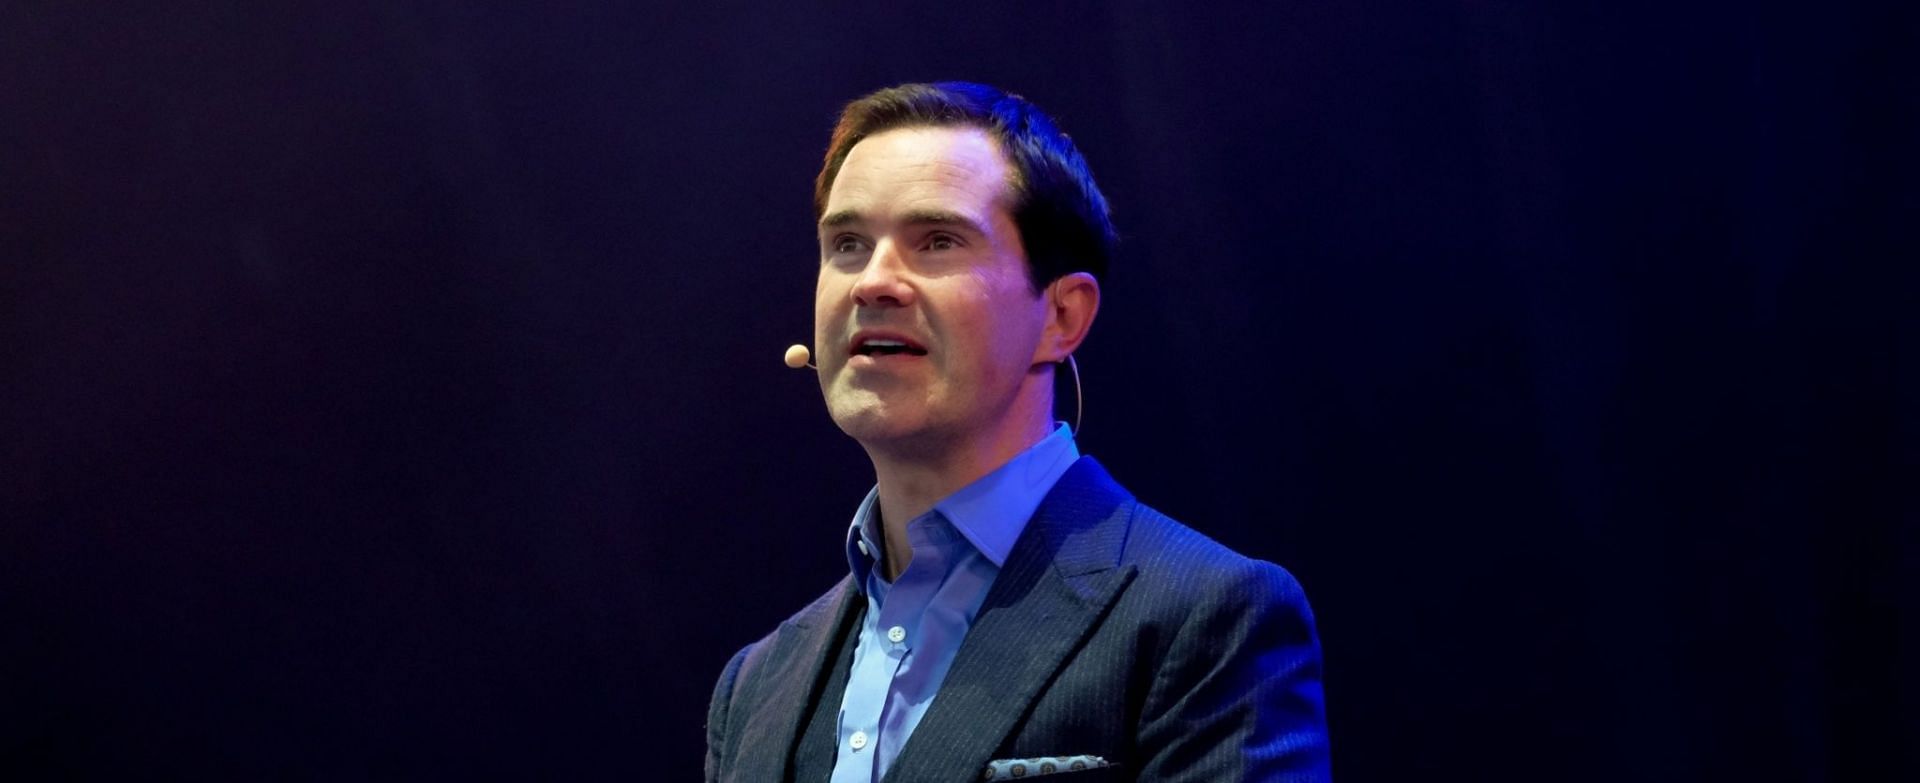 Jimmy Carr sparked a major controversy after making a joke about the murder of Gypsies during the Holocaust (Image via Thomas M Jackson/Getty Images)